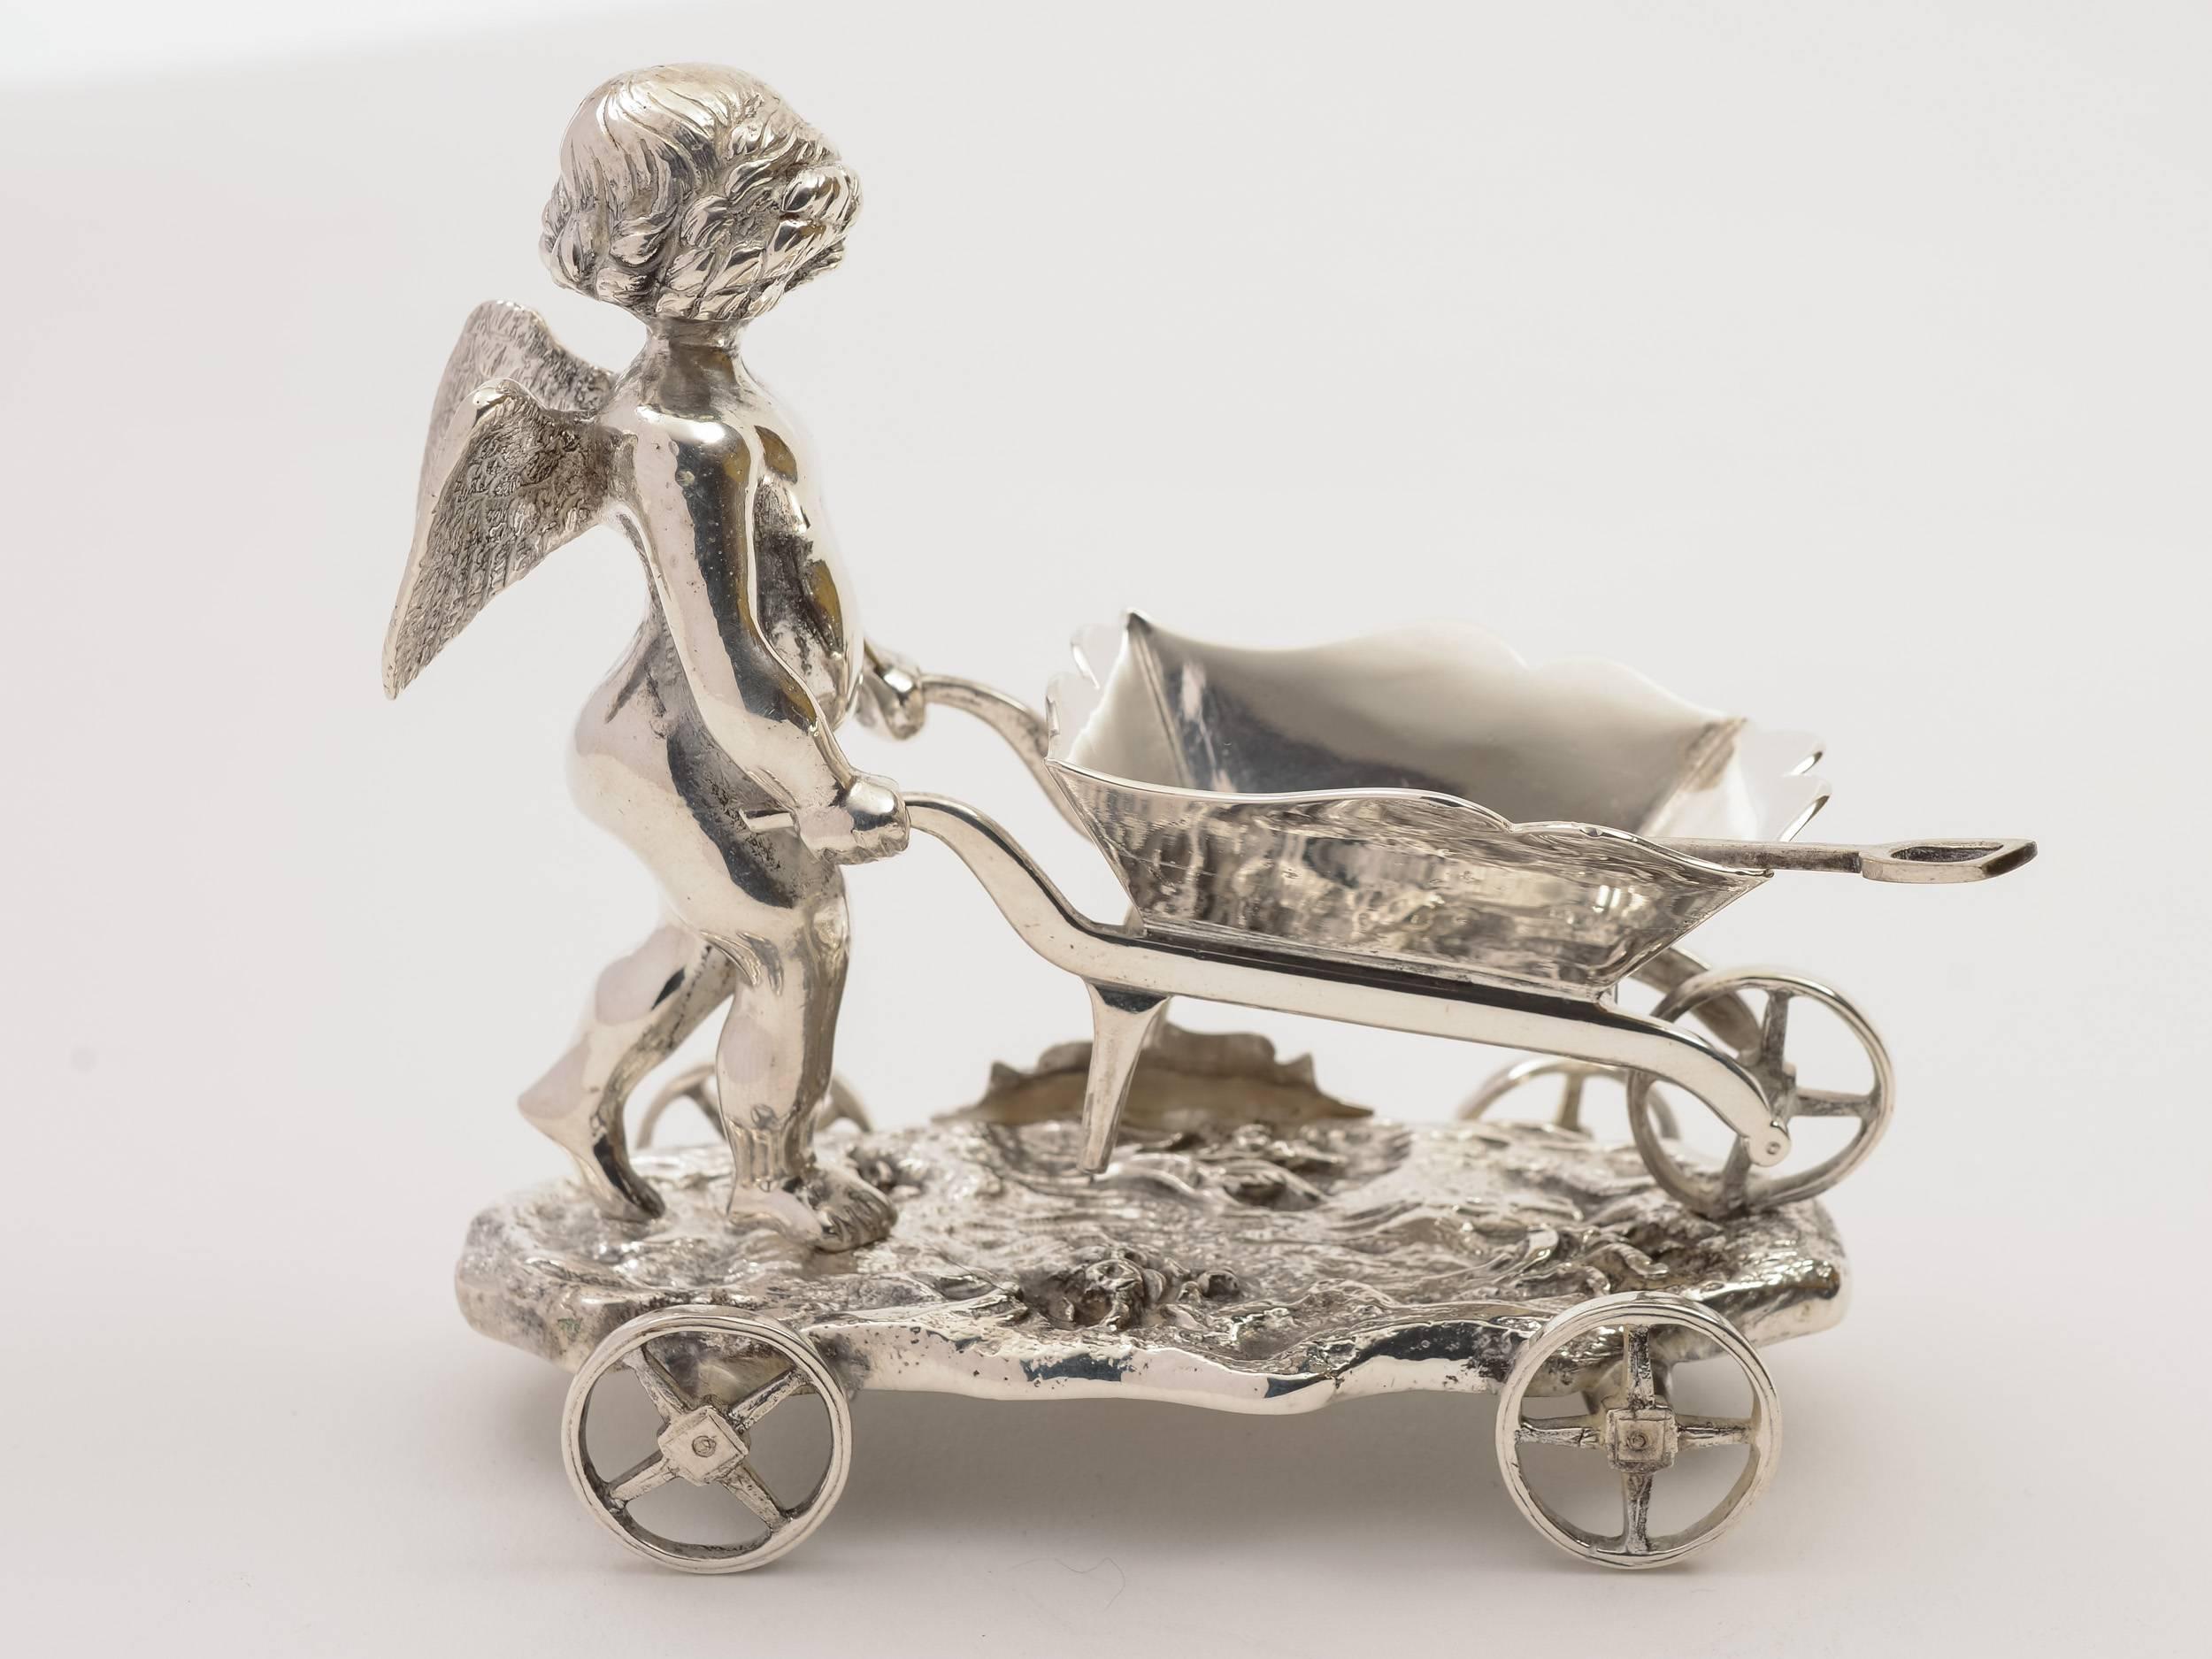 A sweet English Victorian silver plated table salt of cherub pushing a wheelbarrow. Has salt spade and sits on base with functioning wheels and shield that has the words 'Anything in my way' engraved, circa 1880.

Worldwide, first class, tracked